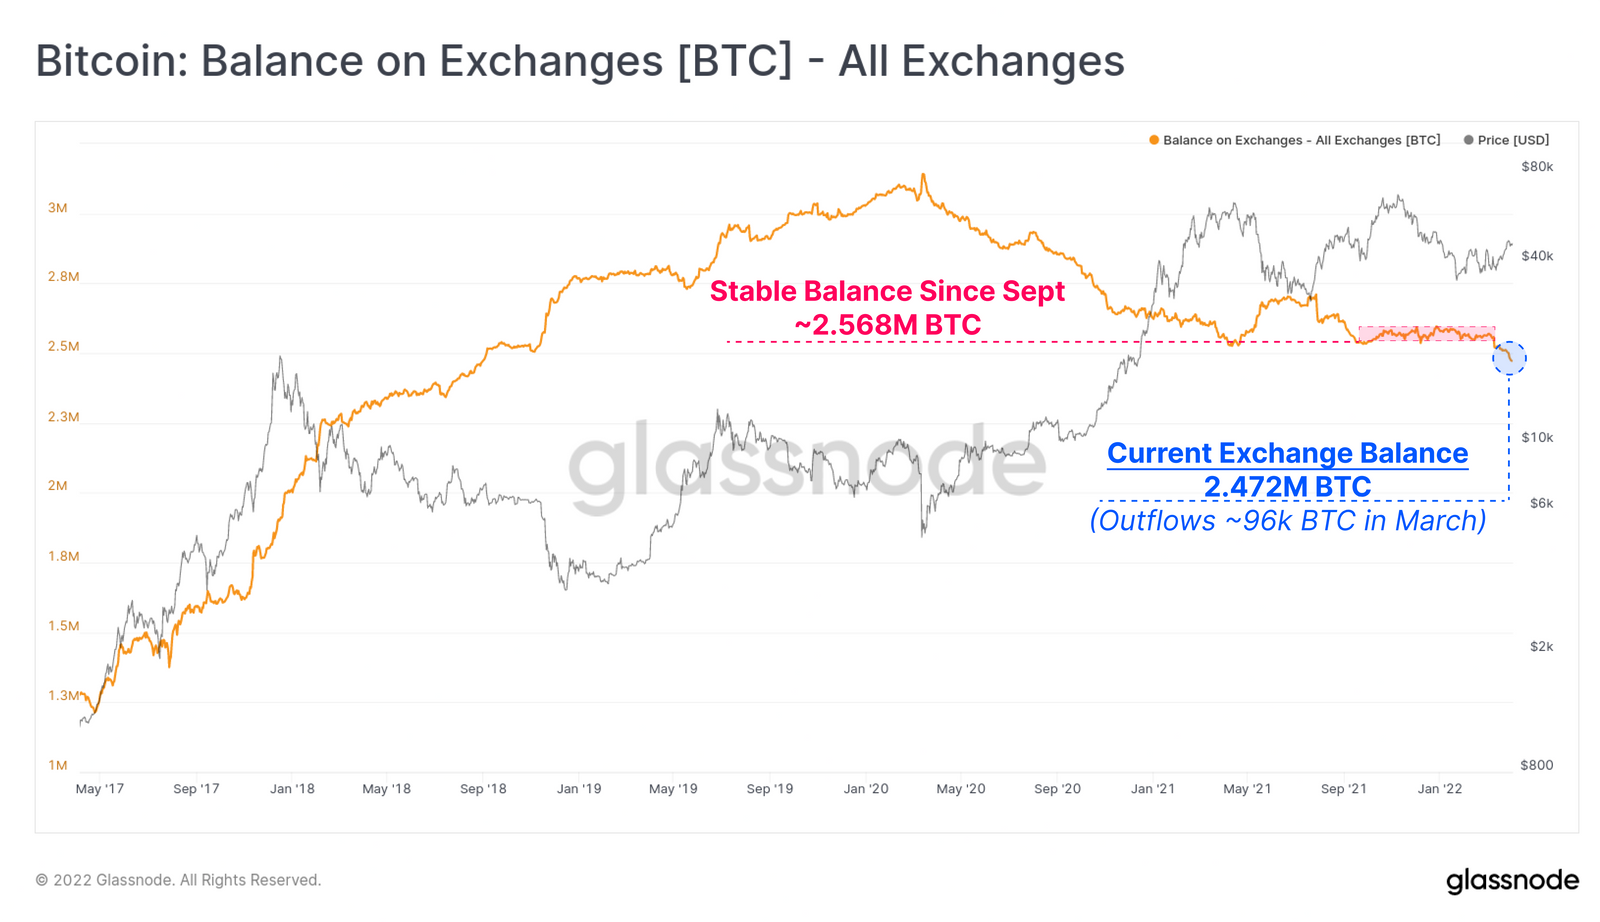 Bitcoin: Balance on Exchanges [BTC]- All Exchanges